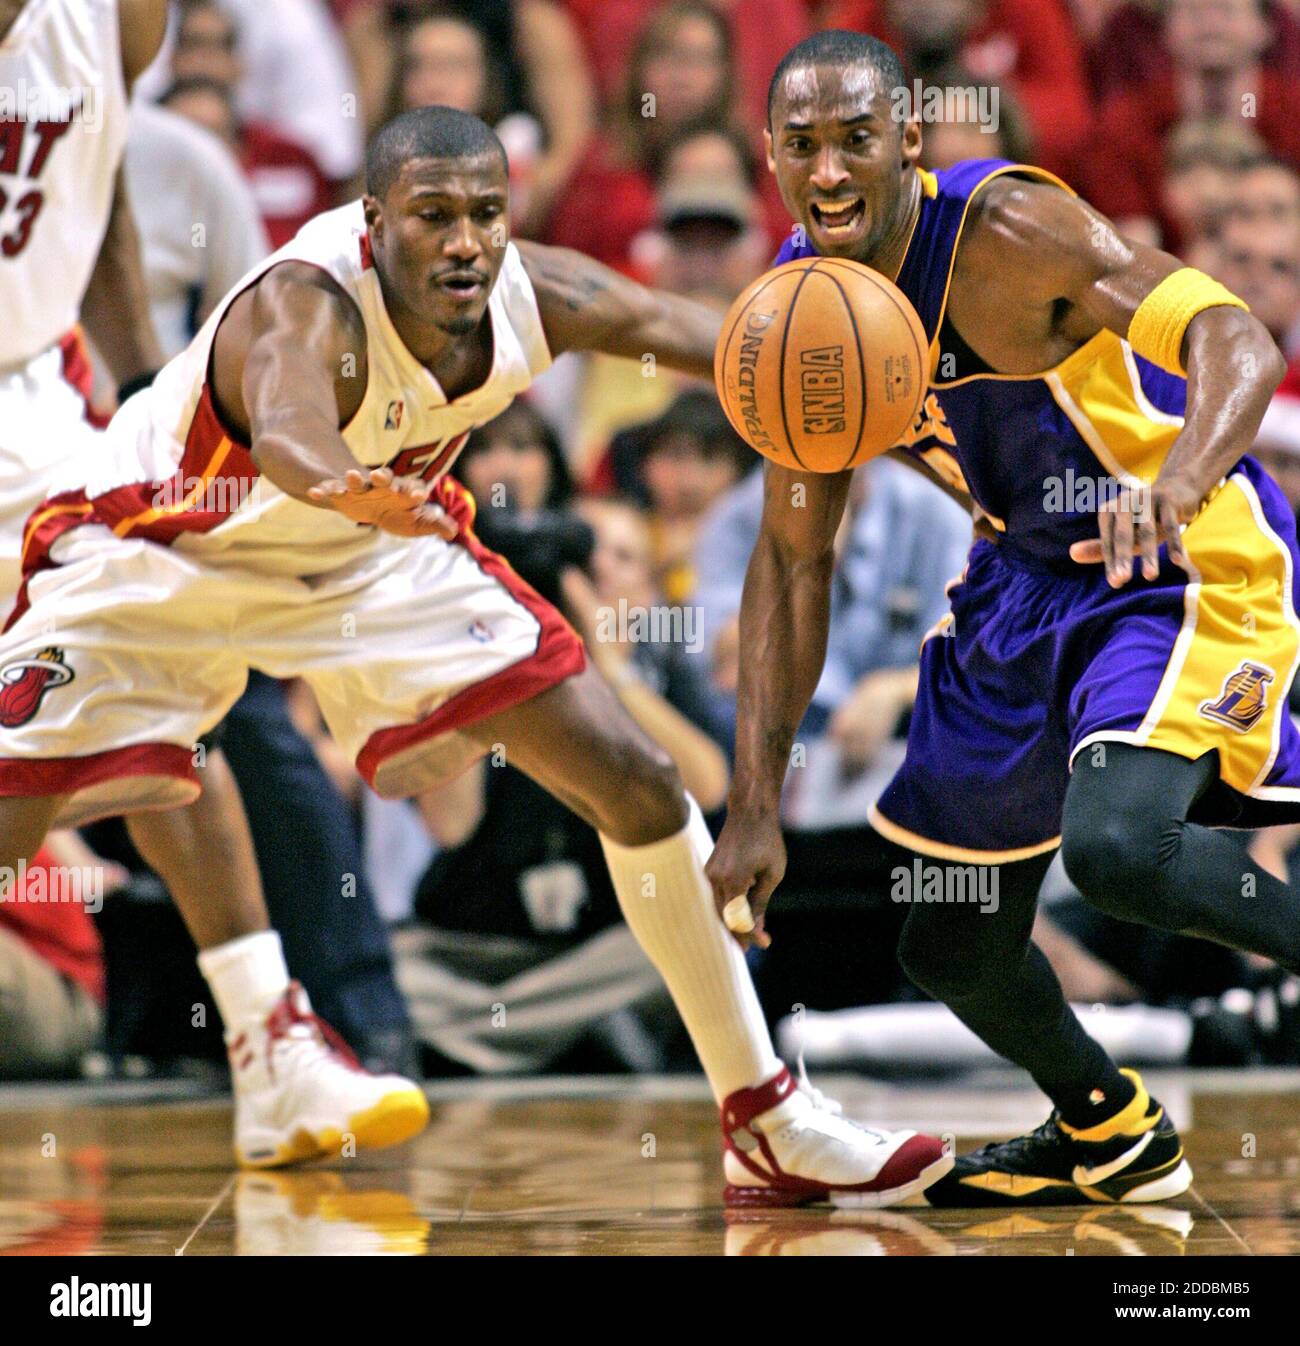 NO FILM, NO VIDEO, NO TV, NO DOCUMENTARY - It's a lose ball as Kobe Bryant of the Lakers and James Posey of the Heat scramble for control as the Miami Heat beat the Los Angeles Lakers 97-92 on December 25, 2005 in Miami, FL, USA. Photo by Al Diaz/Miami Herald/KRT/Cameleon/ABACAPRESS.COM. Stock Photo